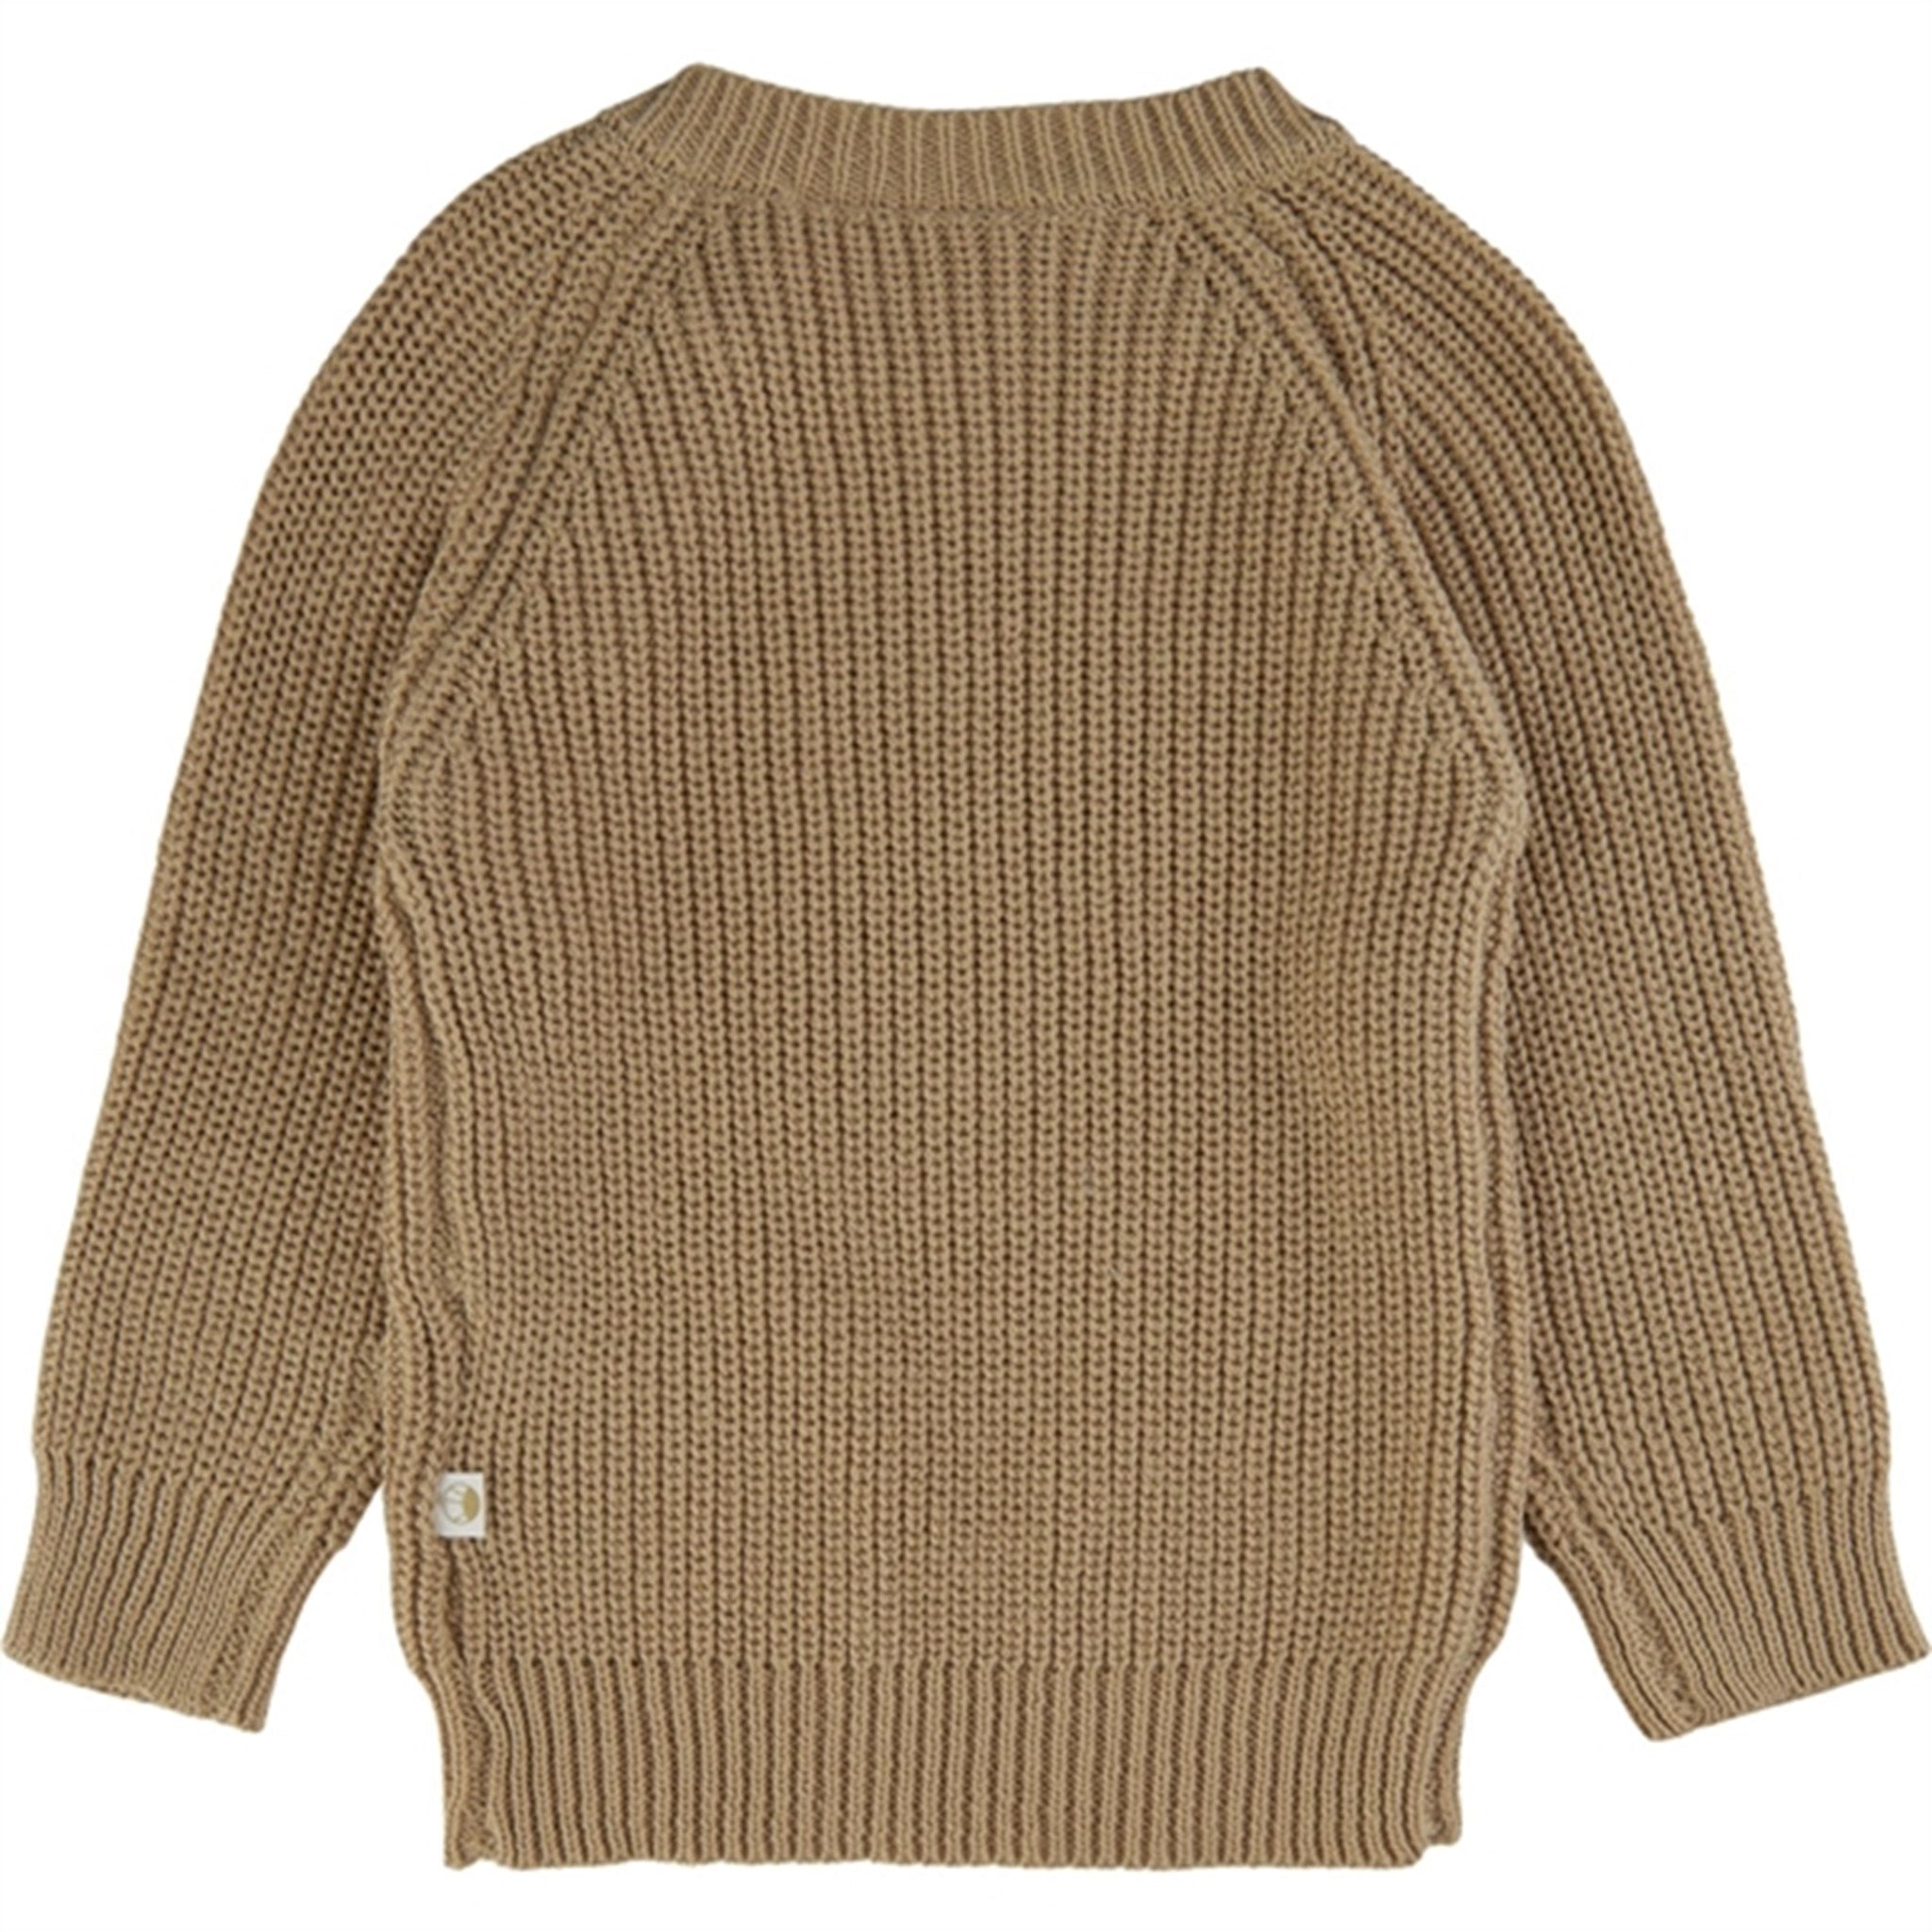 THE NEW Siblings Sesame Elfred Knit 2